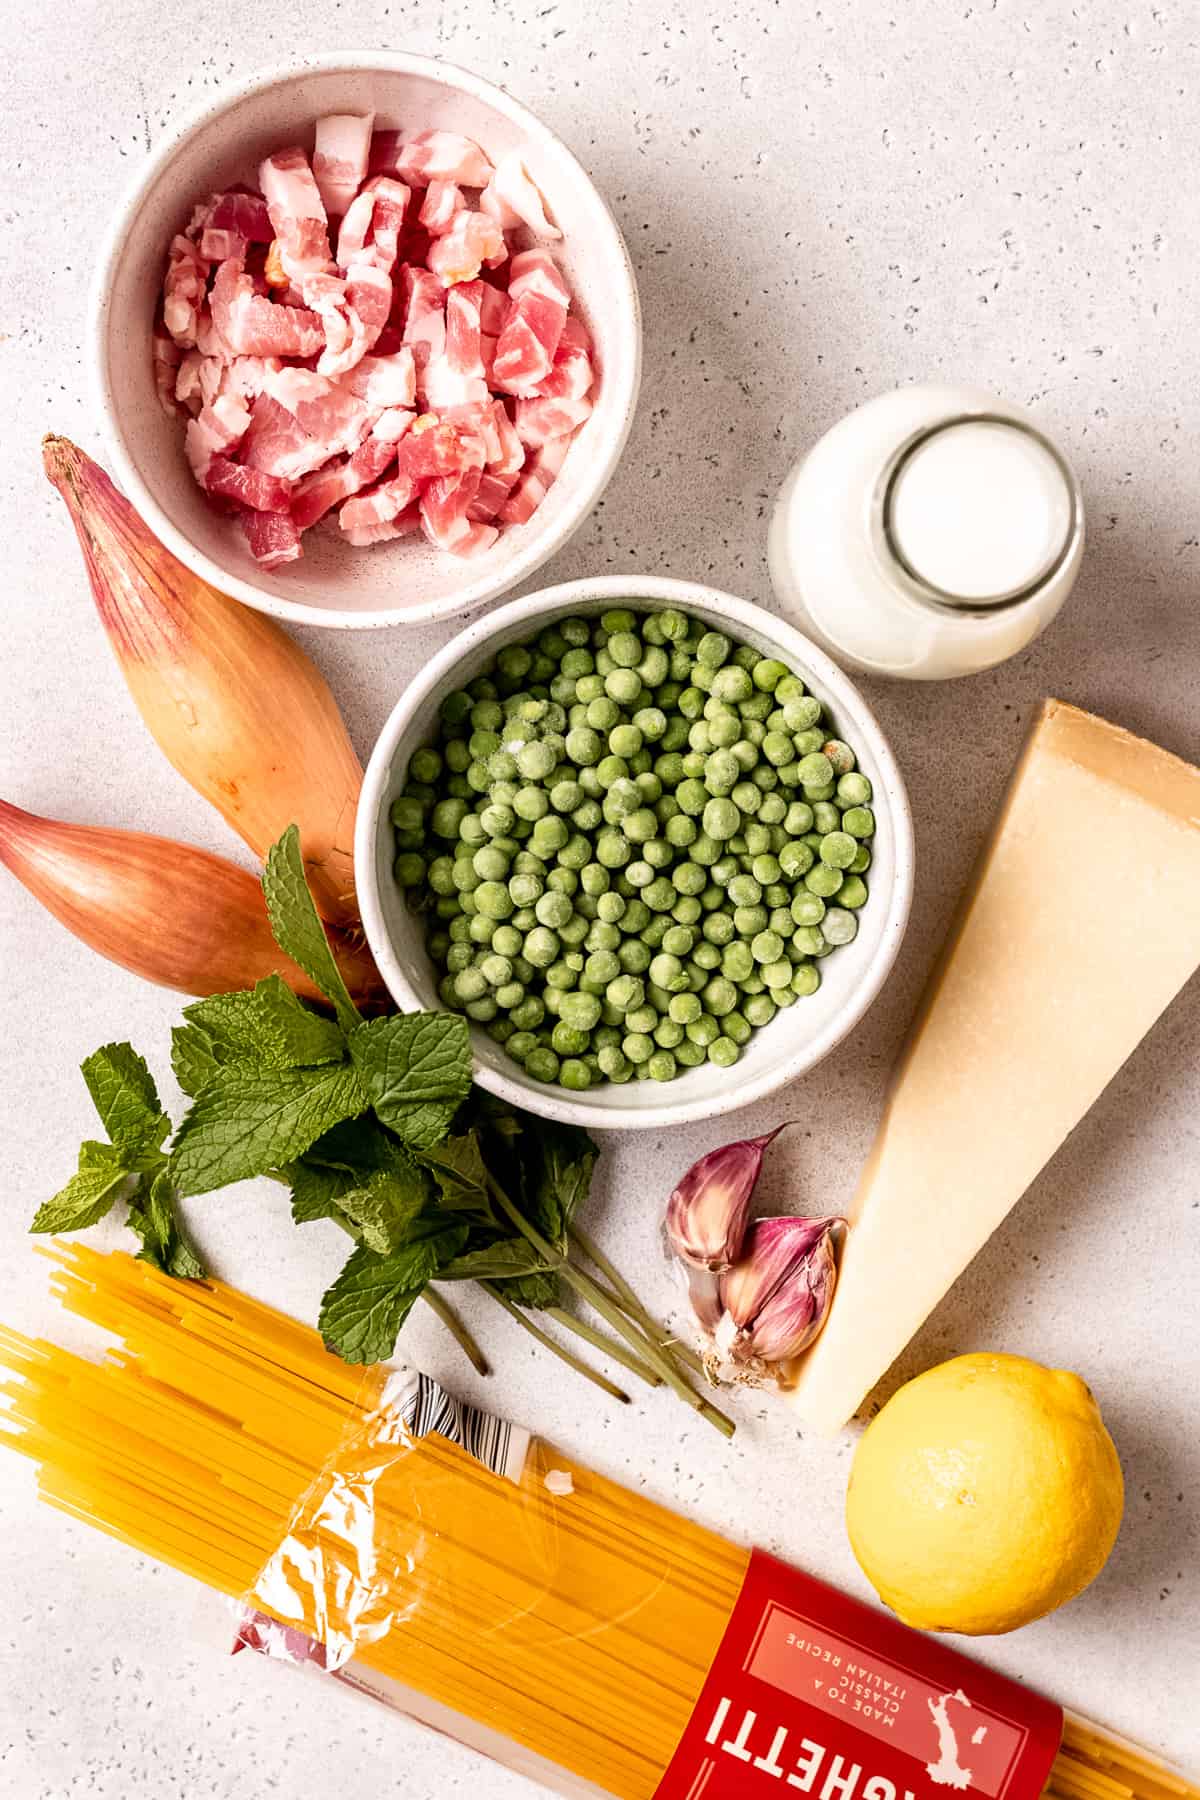 Ingredients for pasta with peas with mint.